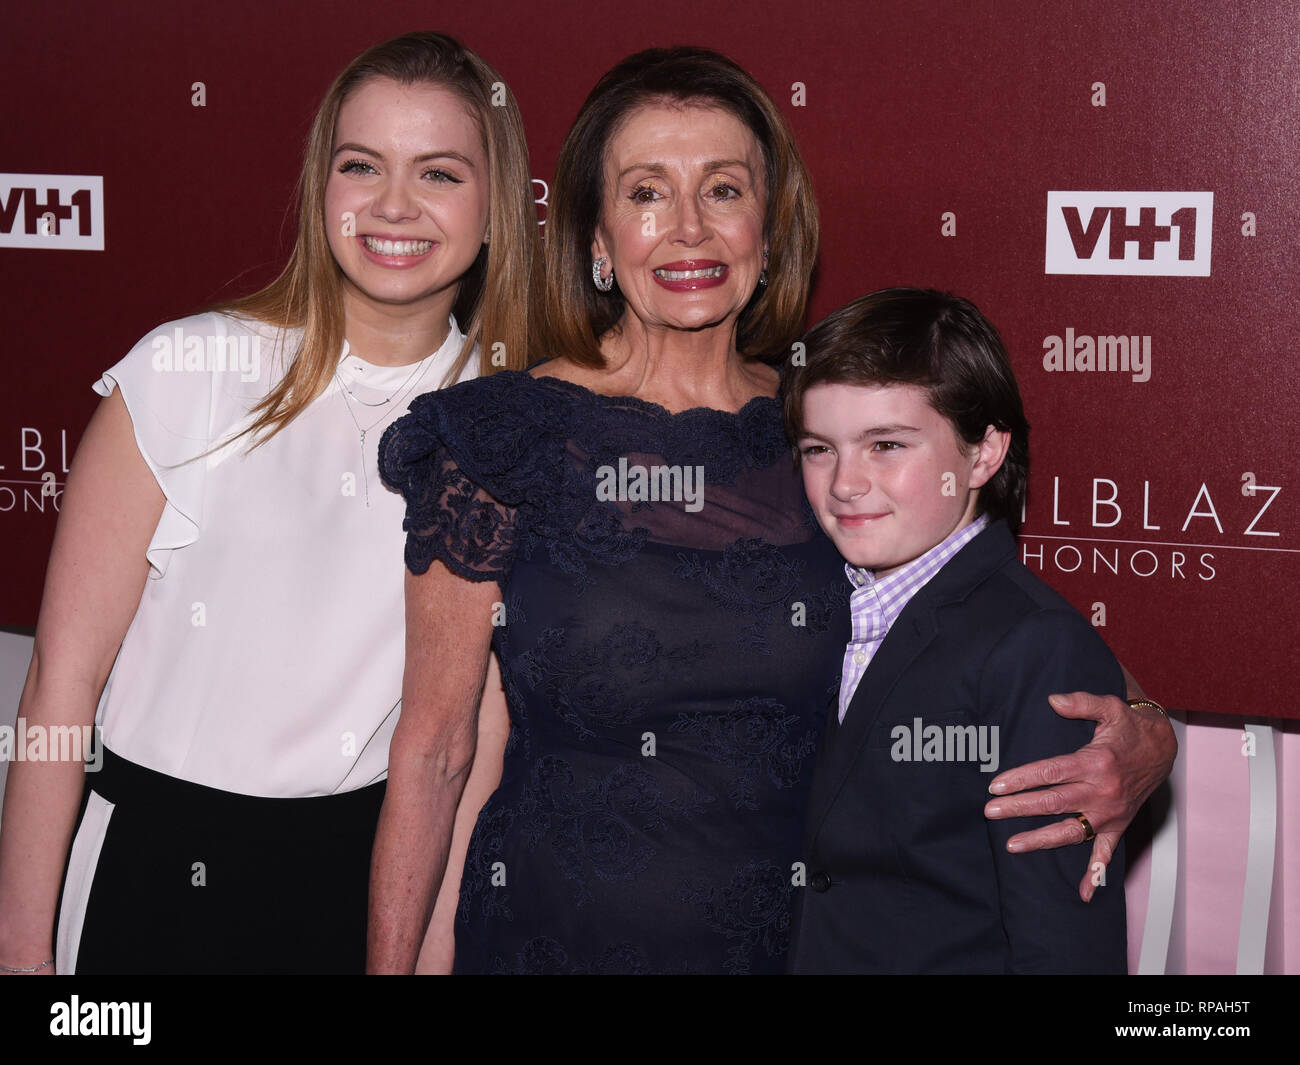 Los Angeles, California, USA. 20th Feb, 2019. 20 February 2019 - Los Angeles, California - Speaker Nancy Pelosi, Thomas Voss and Madeleine Prowda. VH1 Trailblazer Honors celebrate female empowerment held at Wilshire Ebell Theatre. Photo Credit: Billy Bennight/AdMedia Credit: Billy Bennight/AdMedia/ZUMA Wire/Alamy Live News Stock Photo